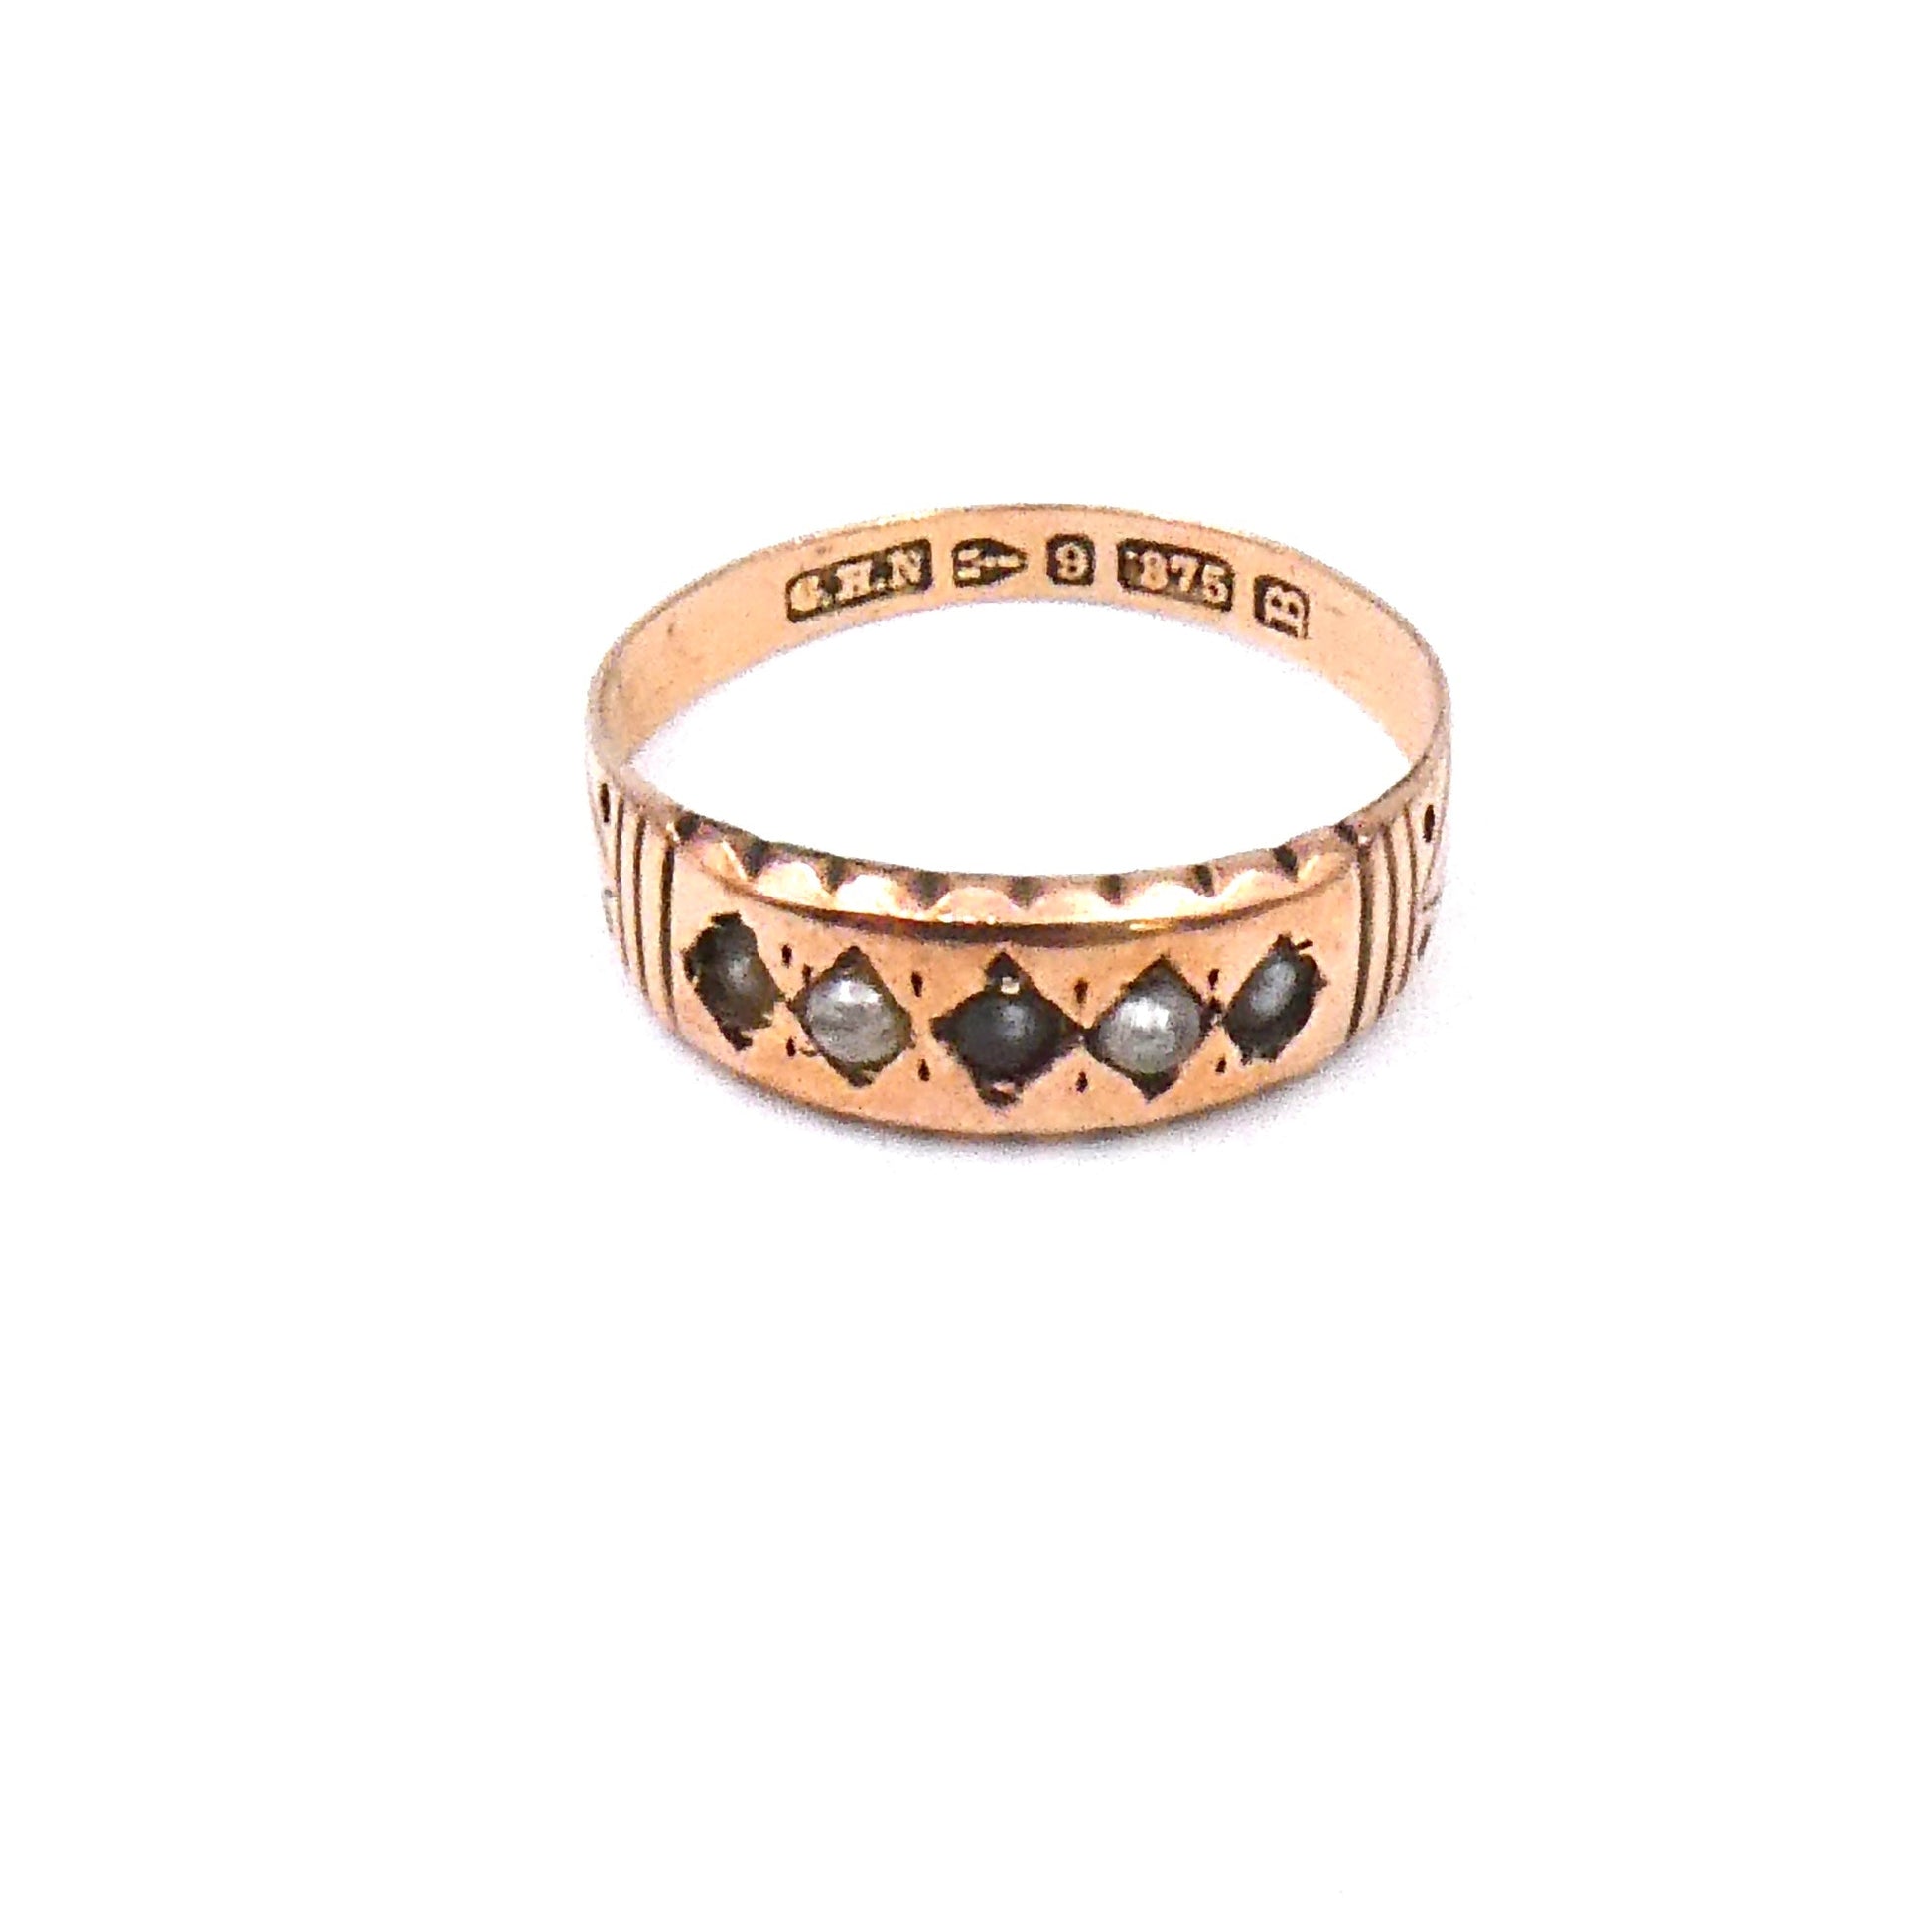 Antique rose gold ornate band set with pearls, a pearl gypsy ring hallmarked 1885. - Collected